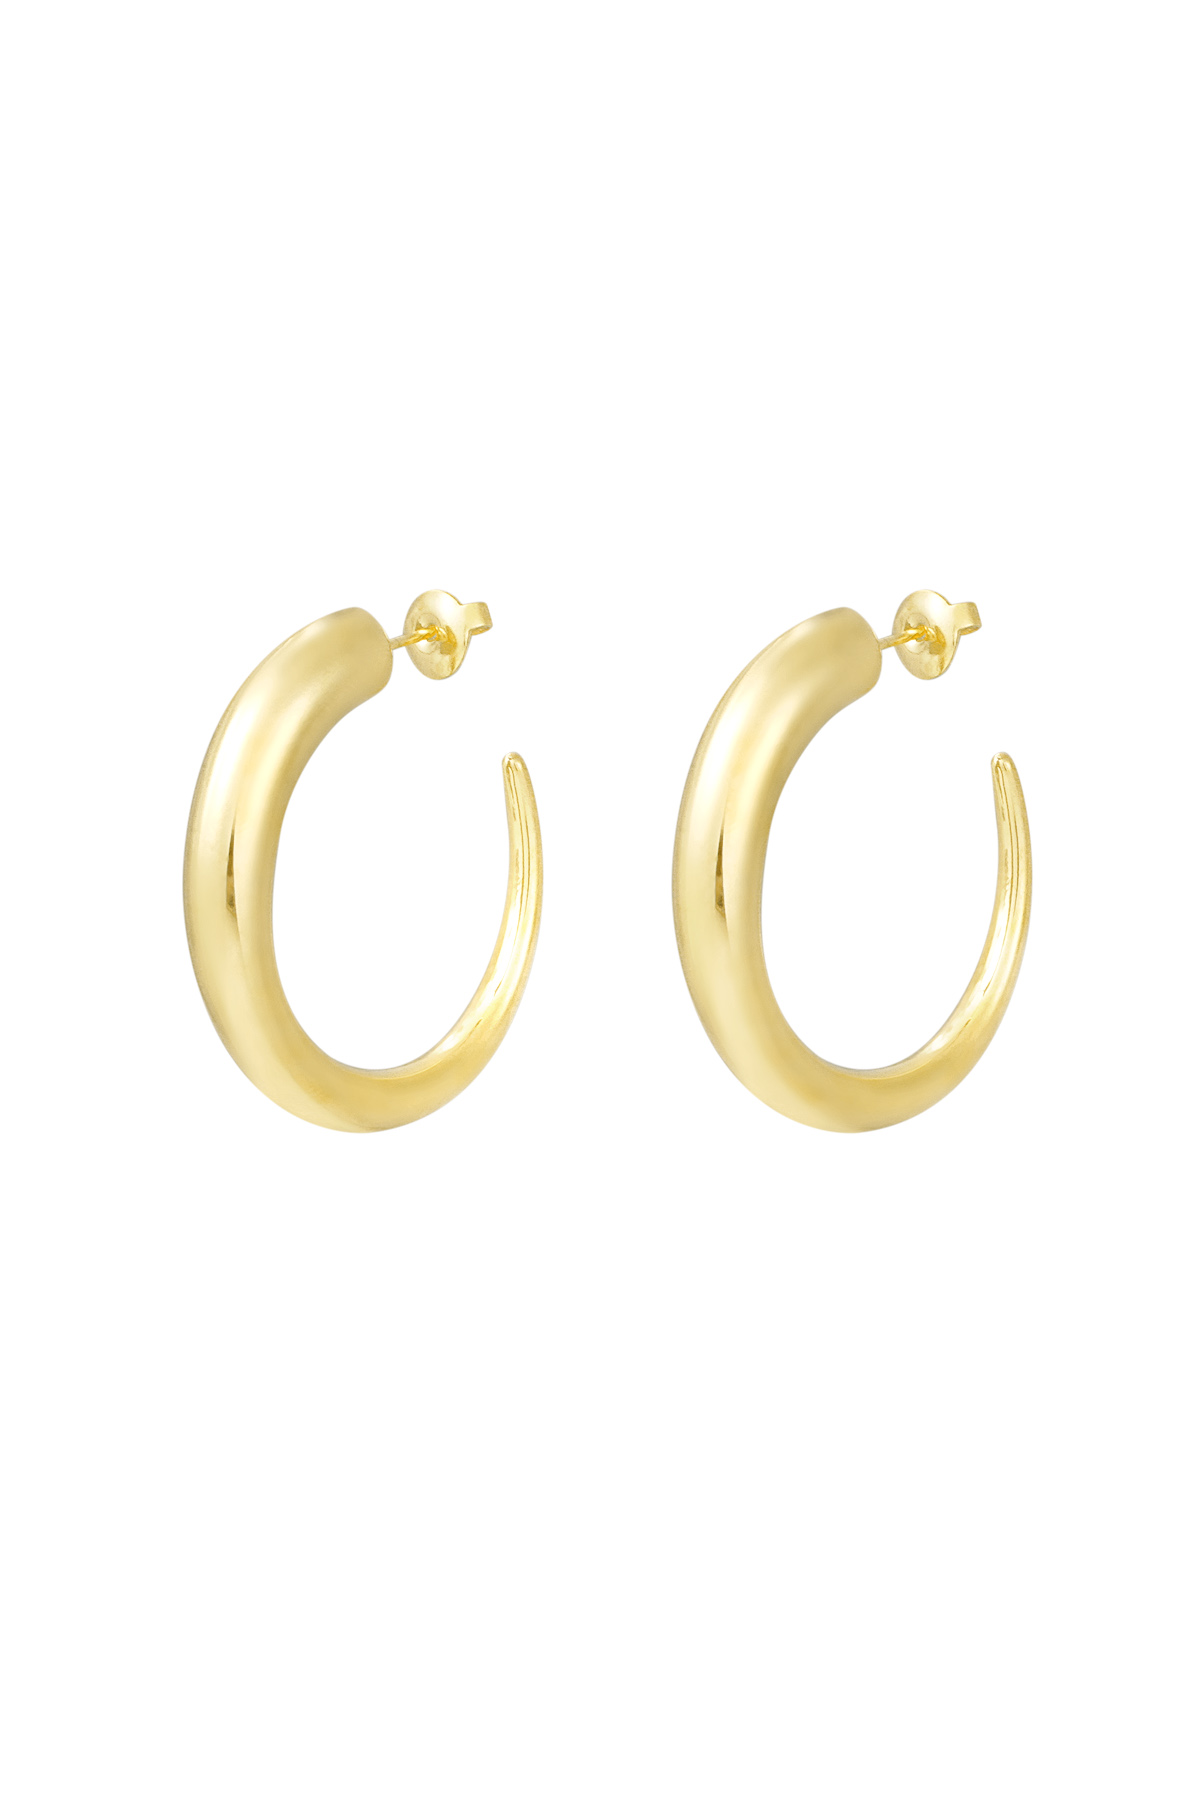 Earrings round - gold h5 